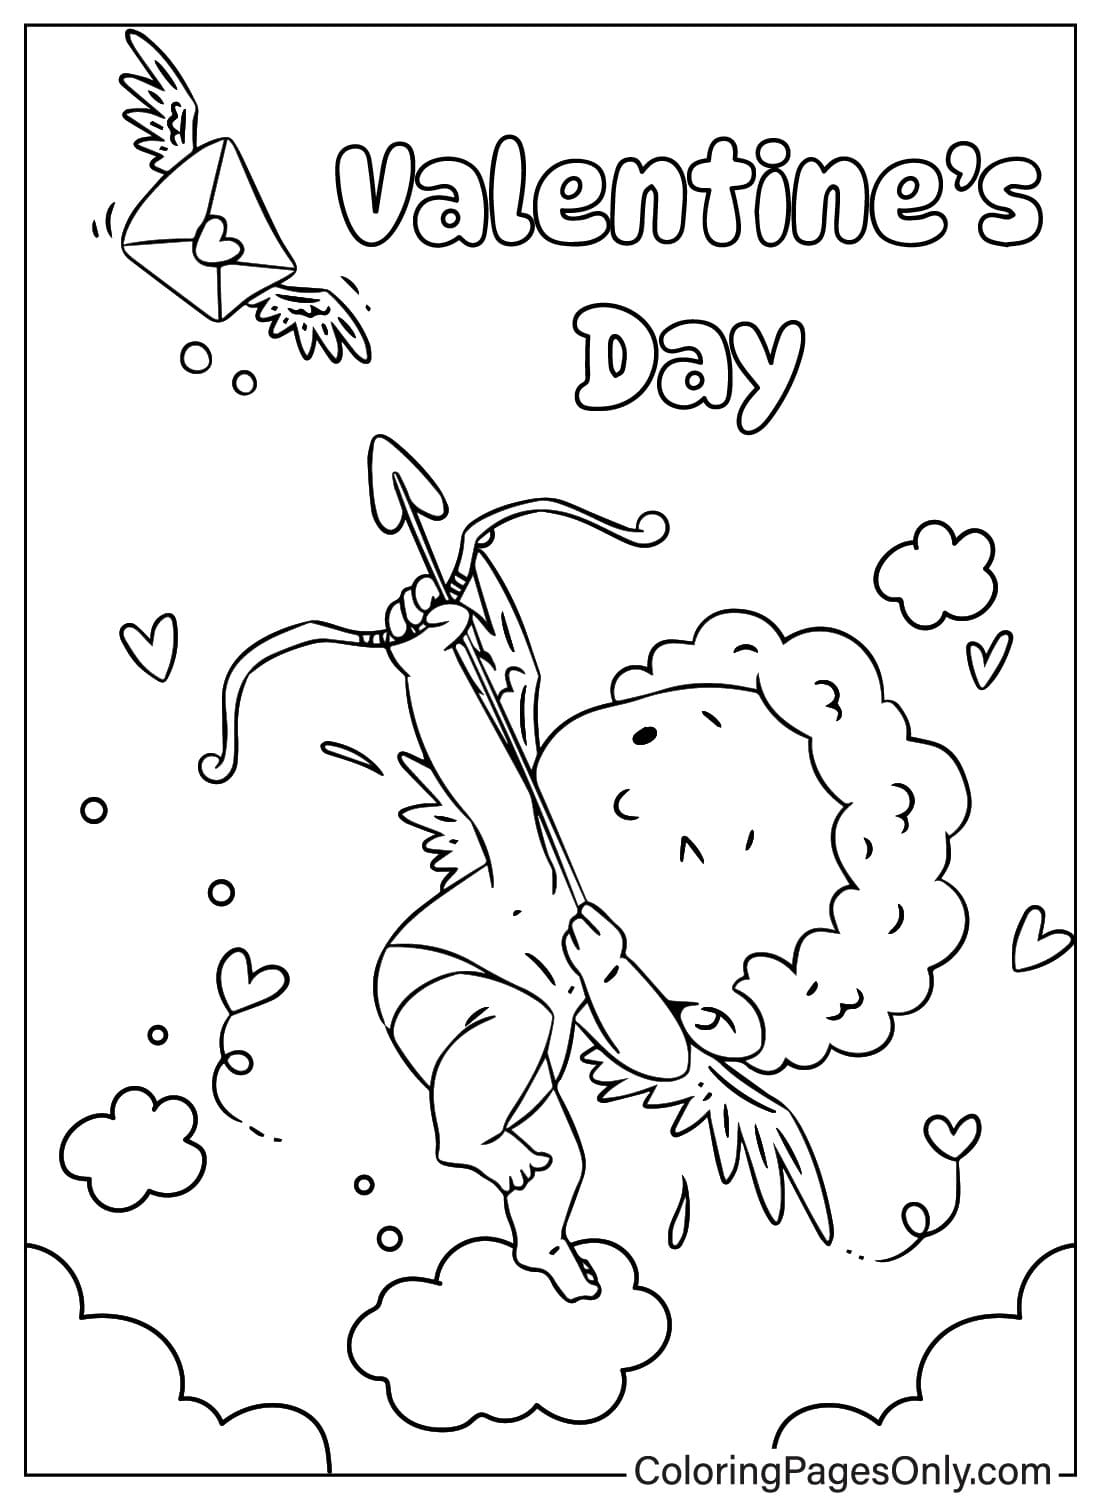 Images Cupid Valentine’s Day Coloring Page from Cupid